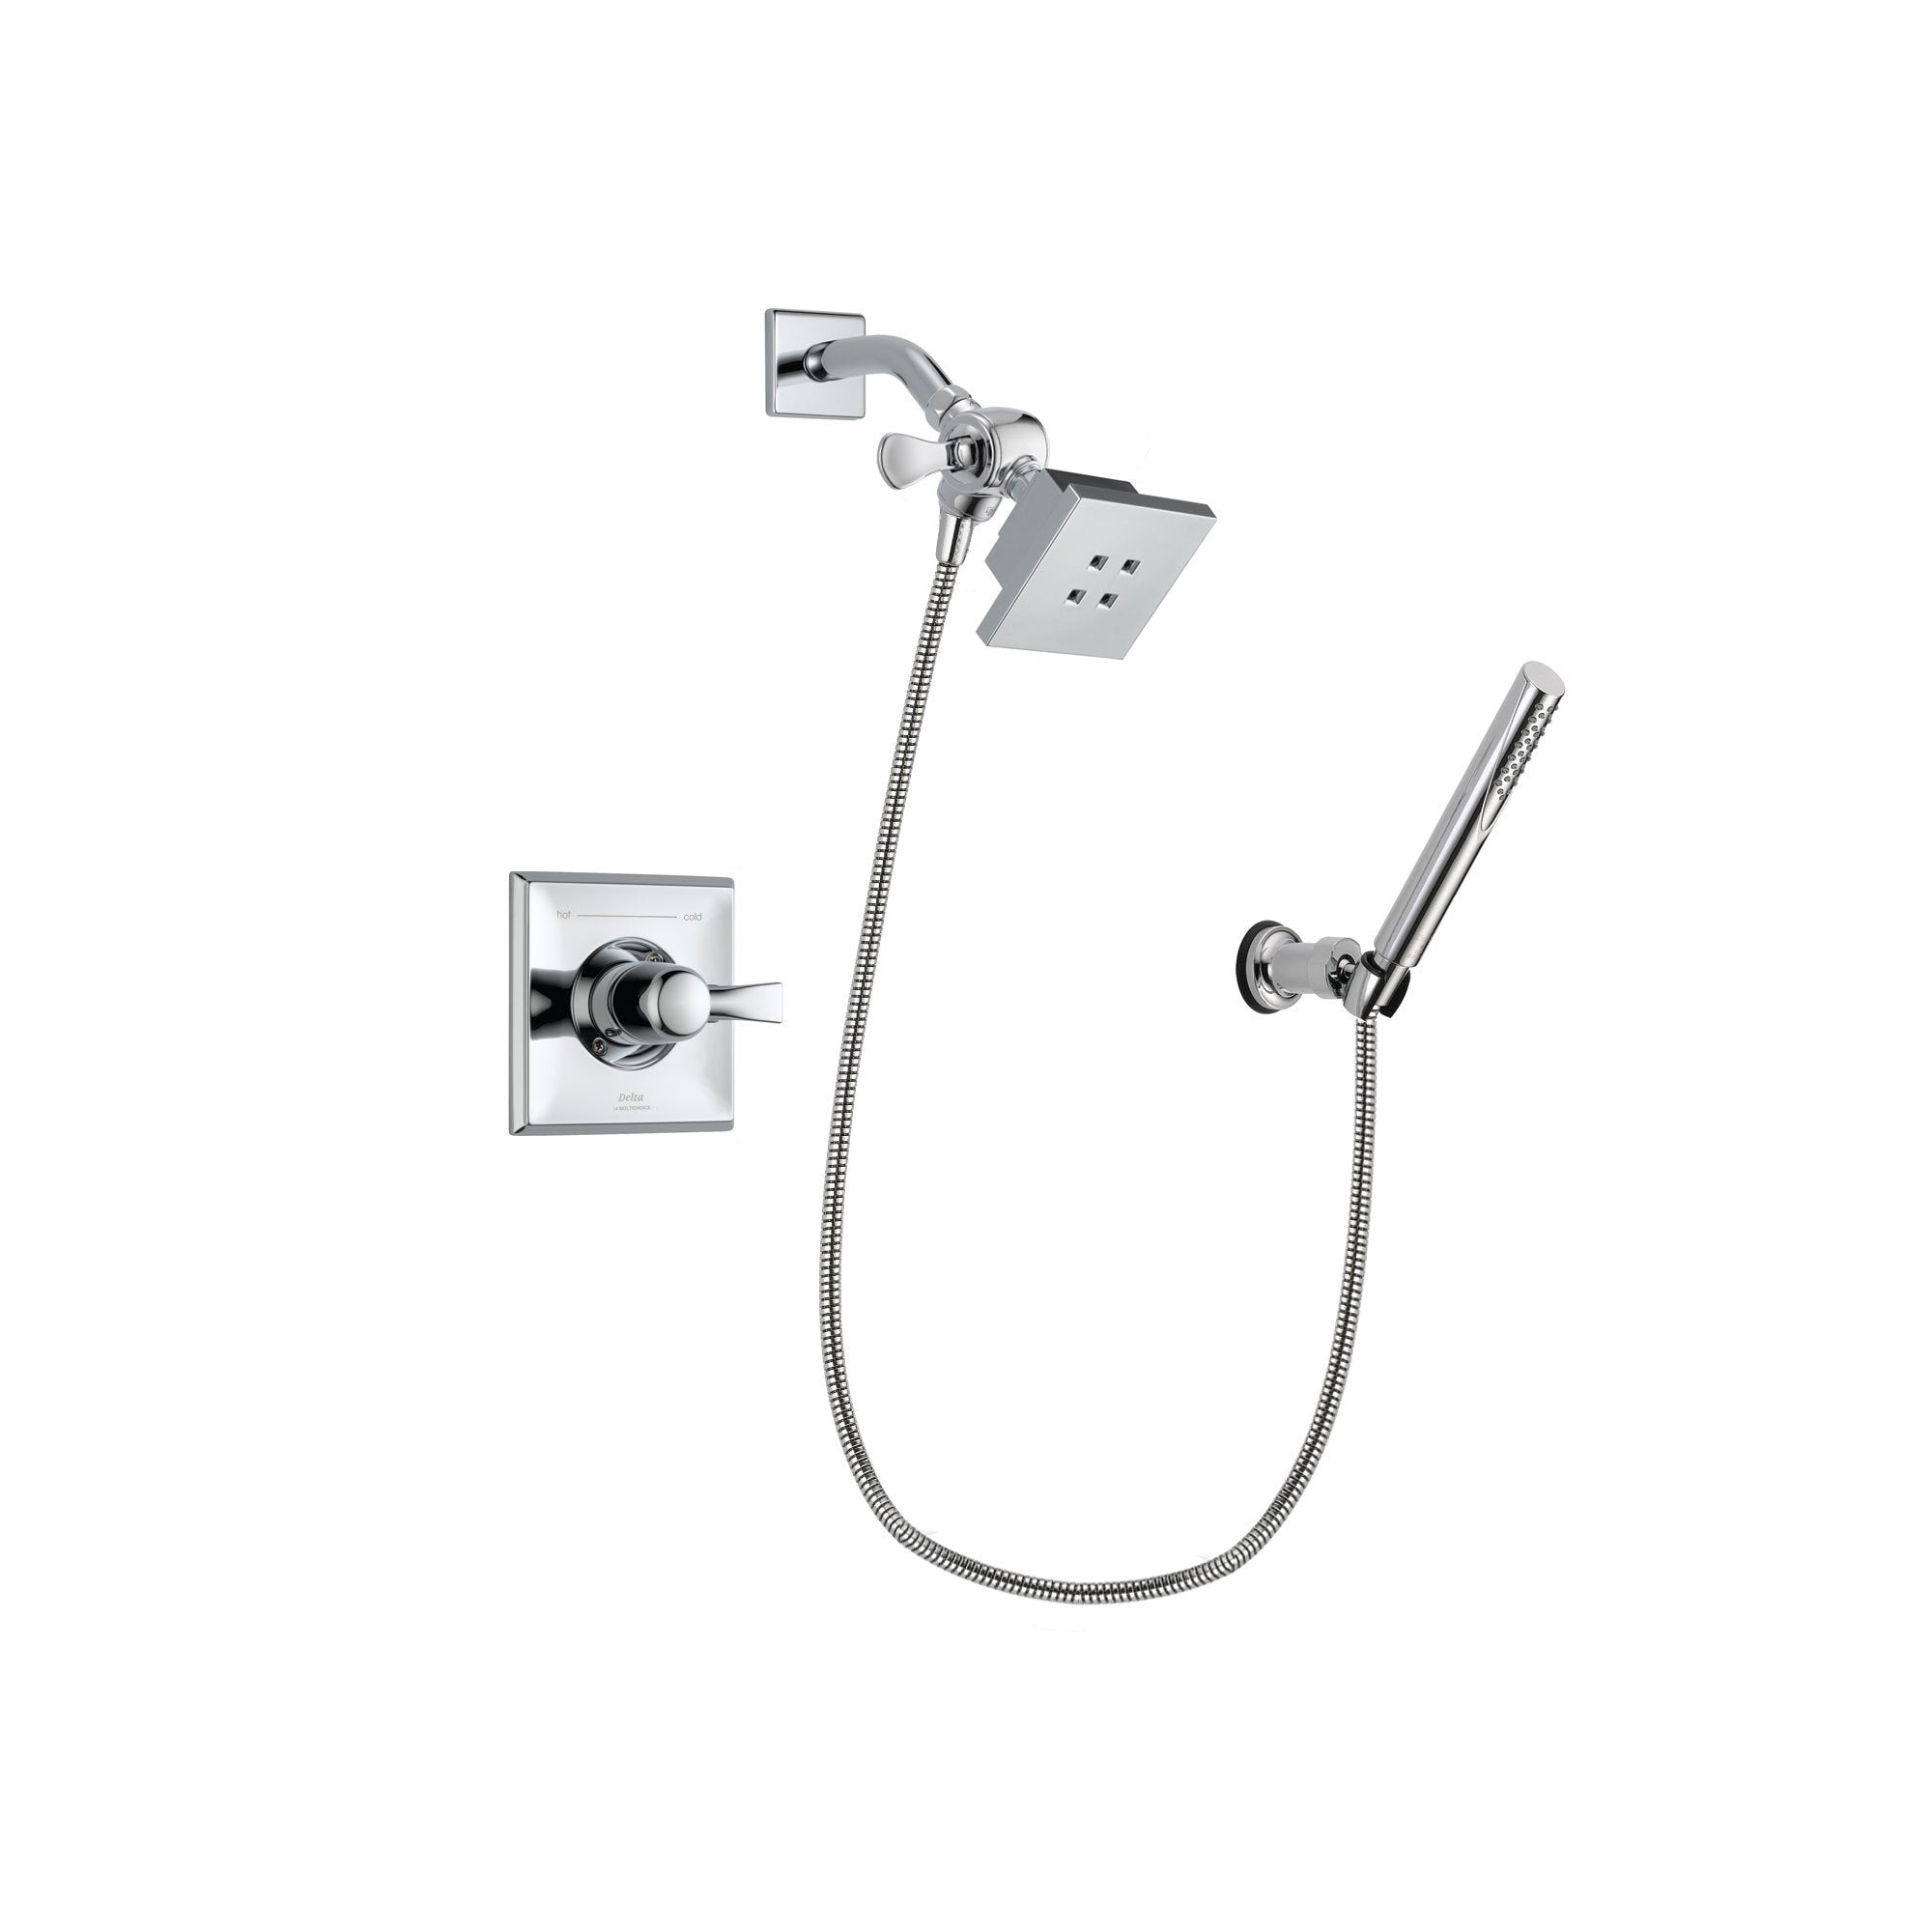 Delta Dryden Chrome Finish Shower Faucet System Package with Square Showerhead and Modern Handheld Shower Spray with Wall Bracket and Hose Includes Rough-in Valve DSP0056V